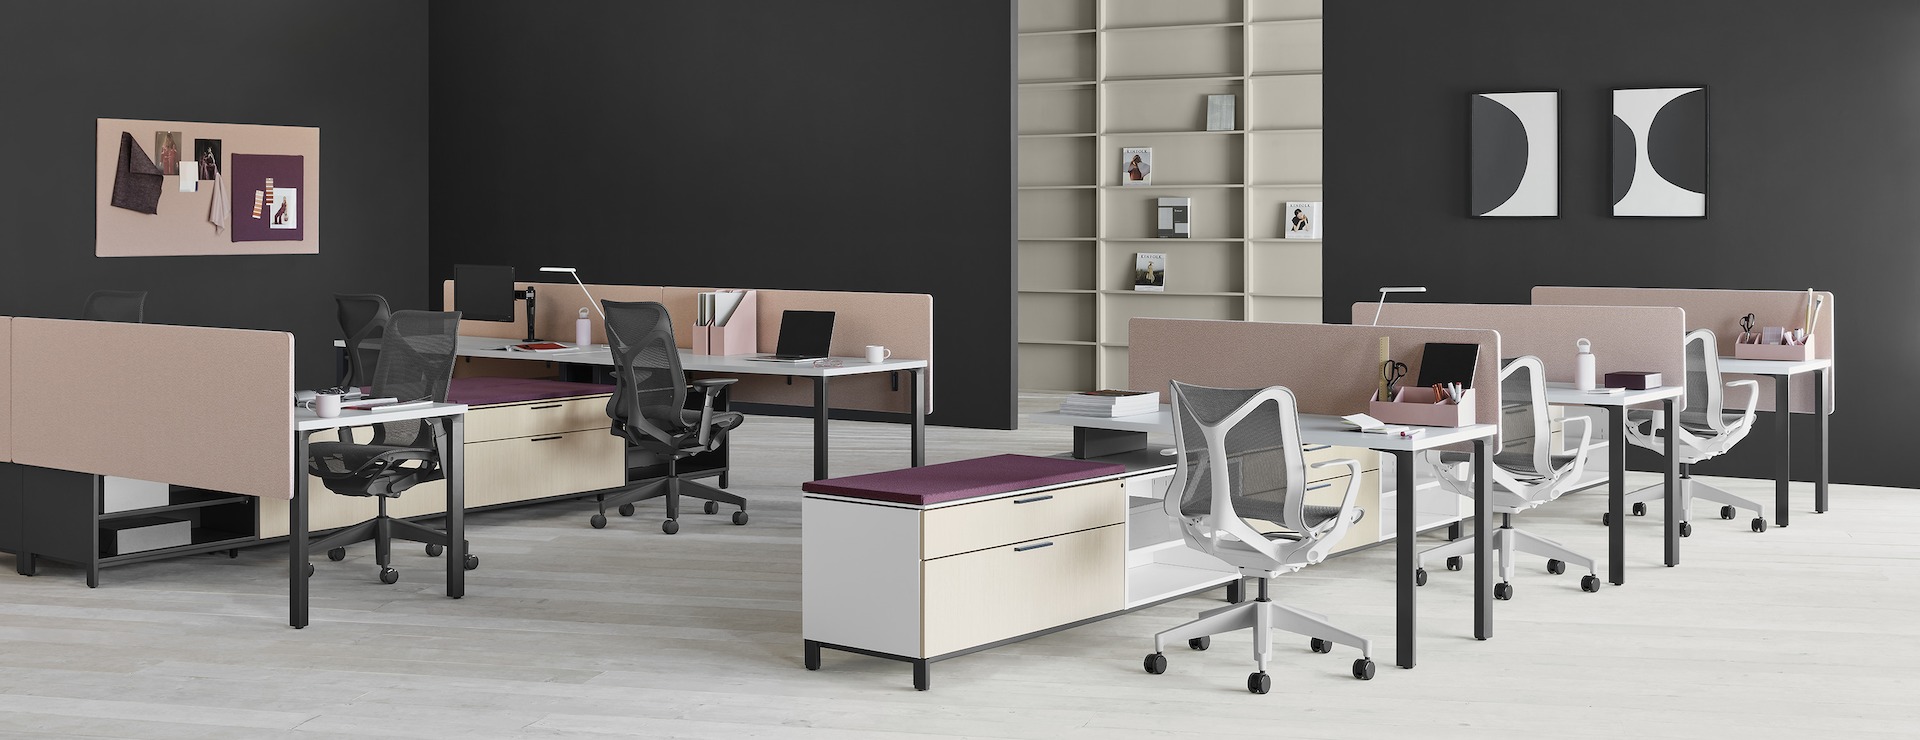 Two Canvas Storage workstations with pink screens, lower storage with purple cushion tops, and Cosm chairs .